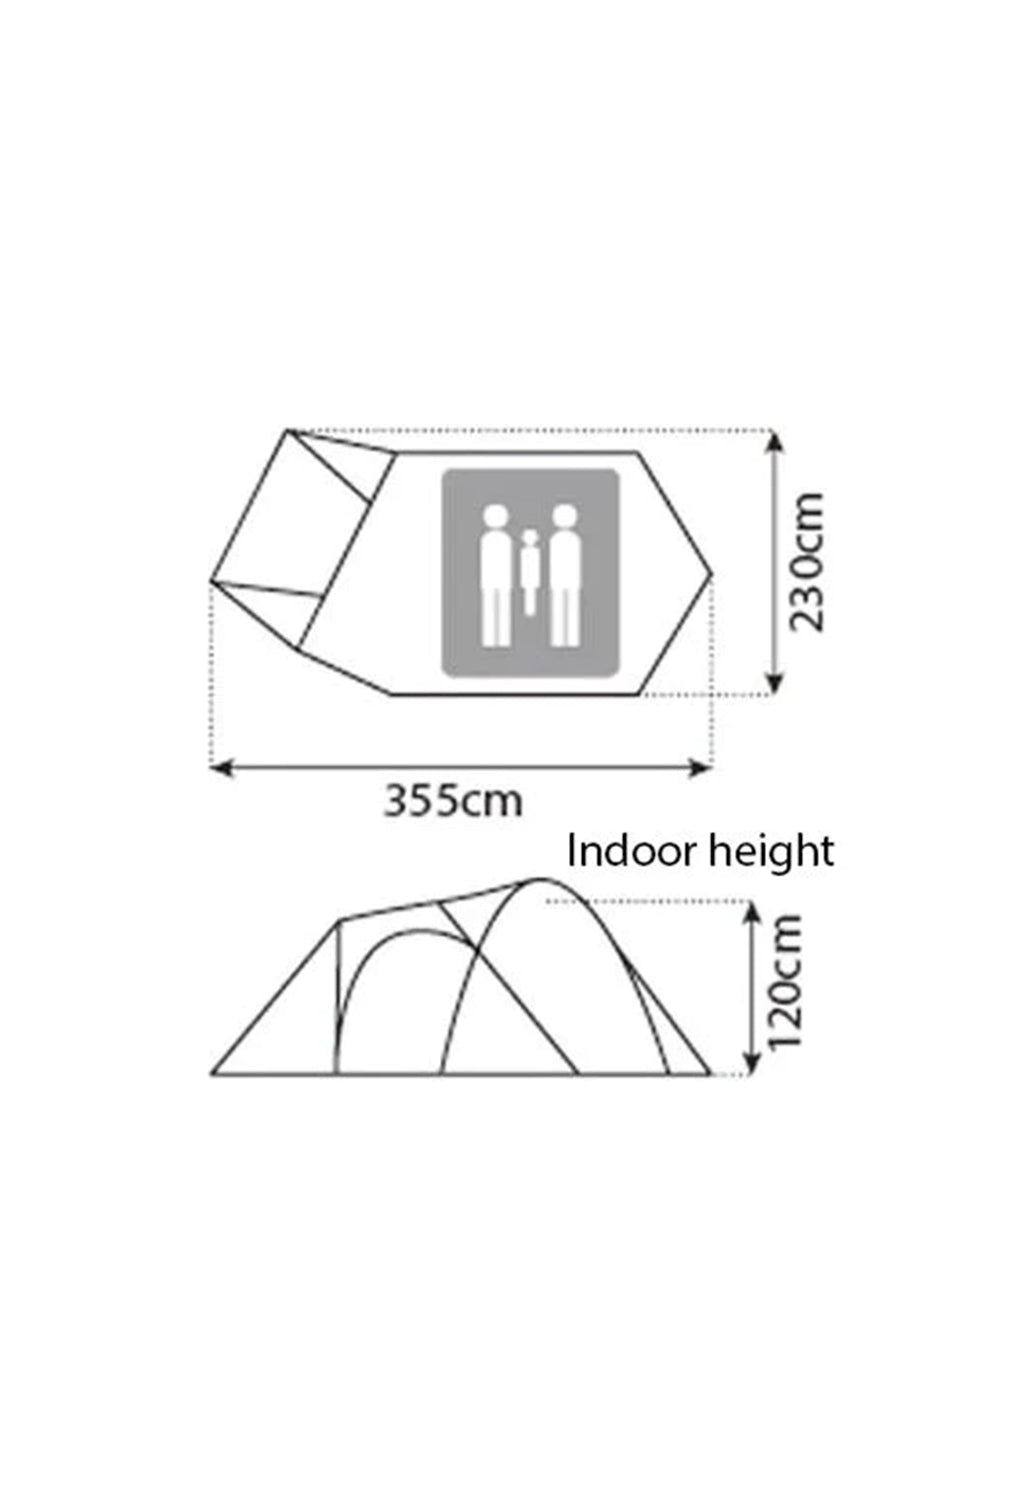 Snow Peak Amenity Dome S Tent - First Camp Rental